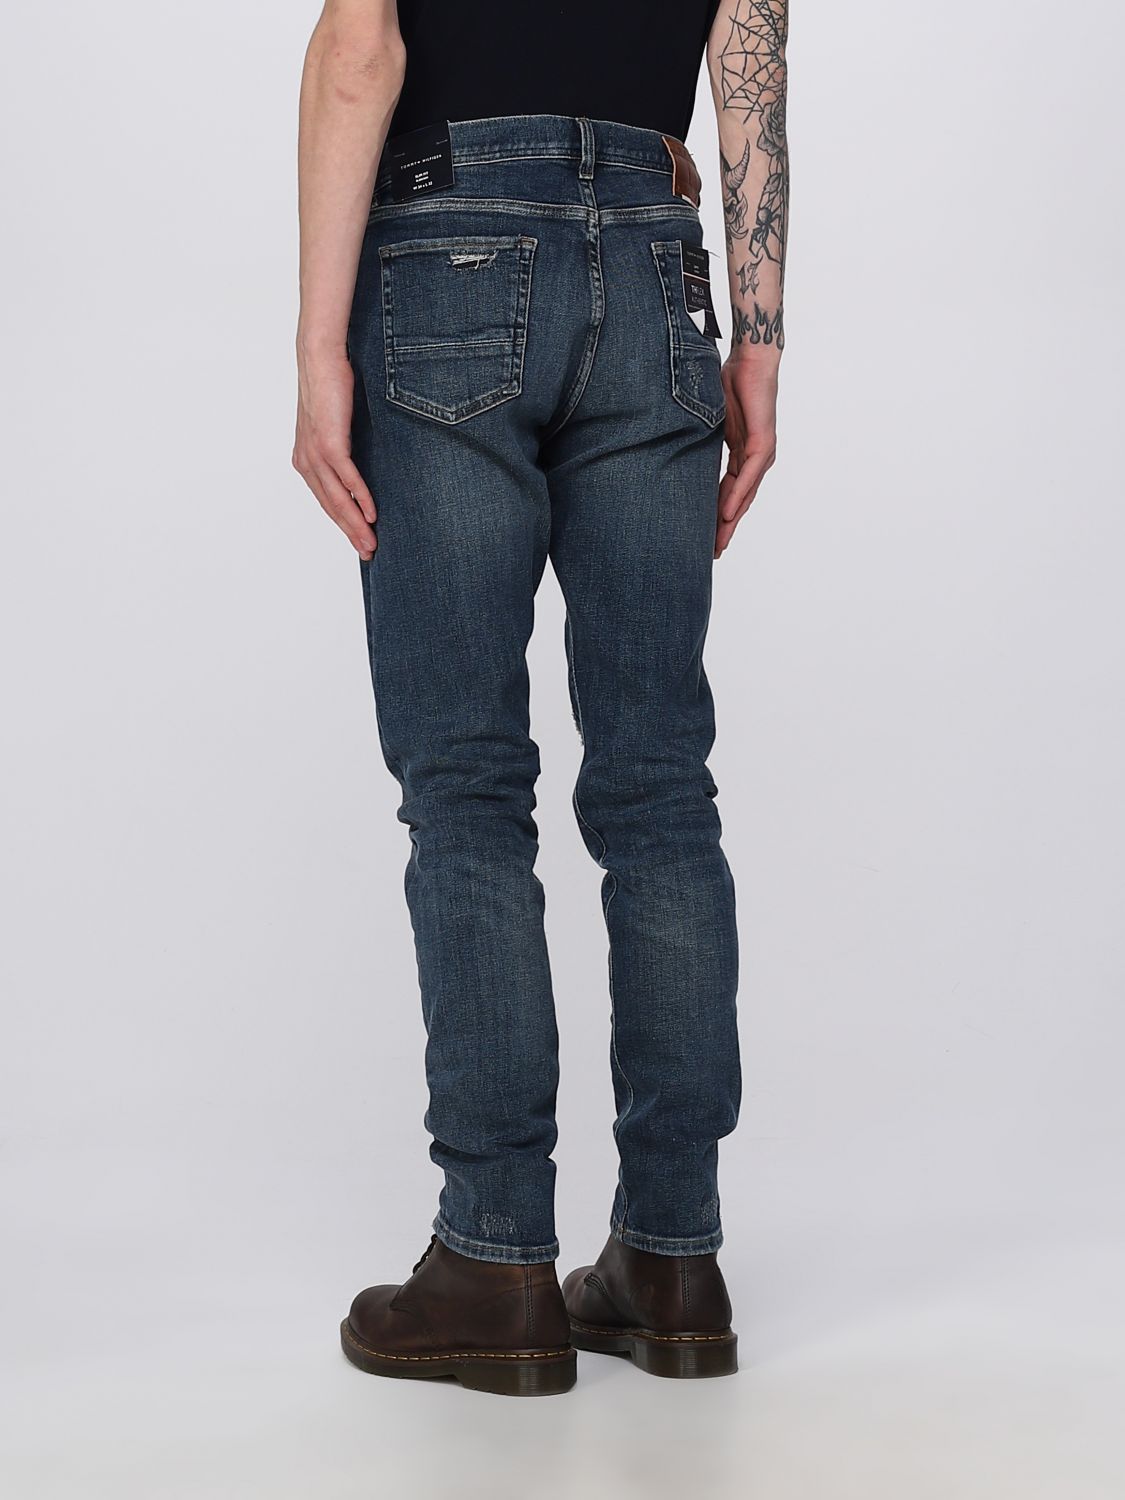 overdrijving Saai Uitbarsten TOMMY HILFIGER: jeans for man - Denim | Tommy Hilfiger jeans MW0MW29615  online on GIGLIO.COM